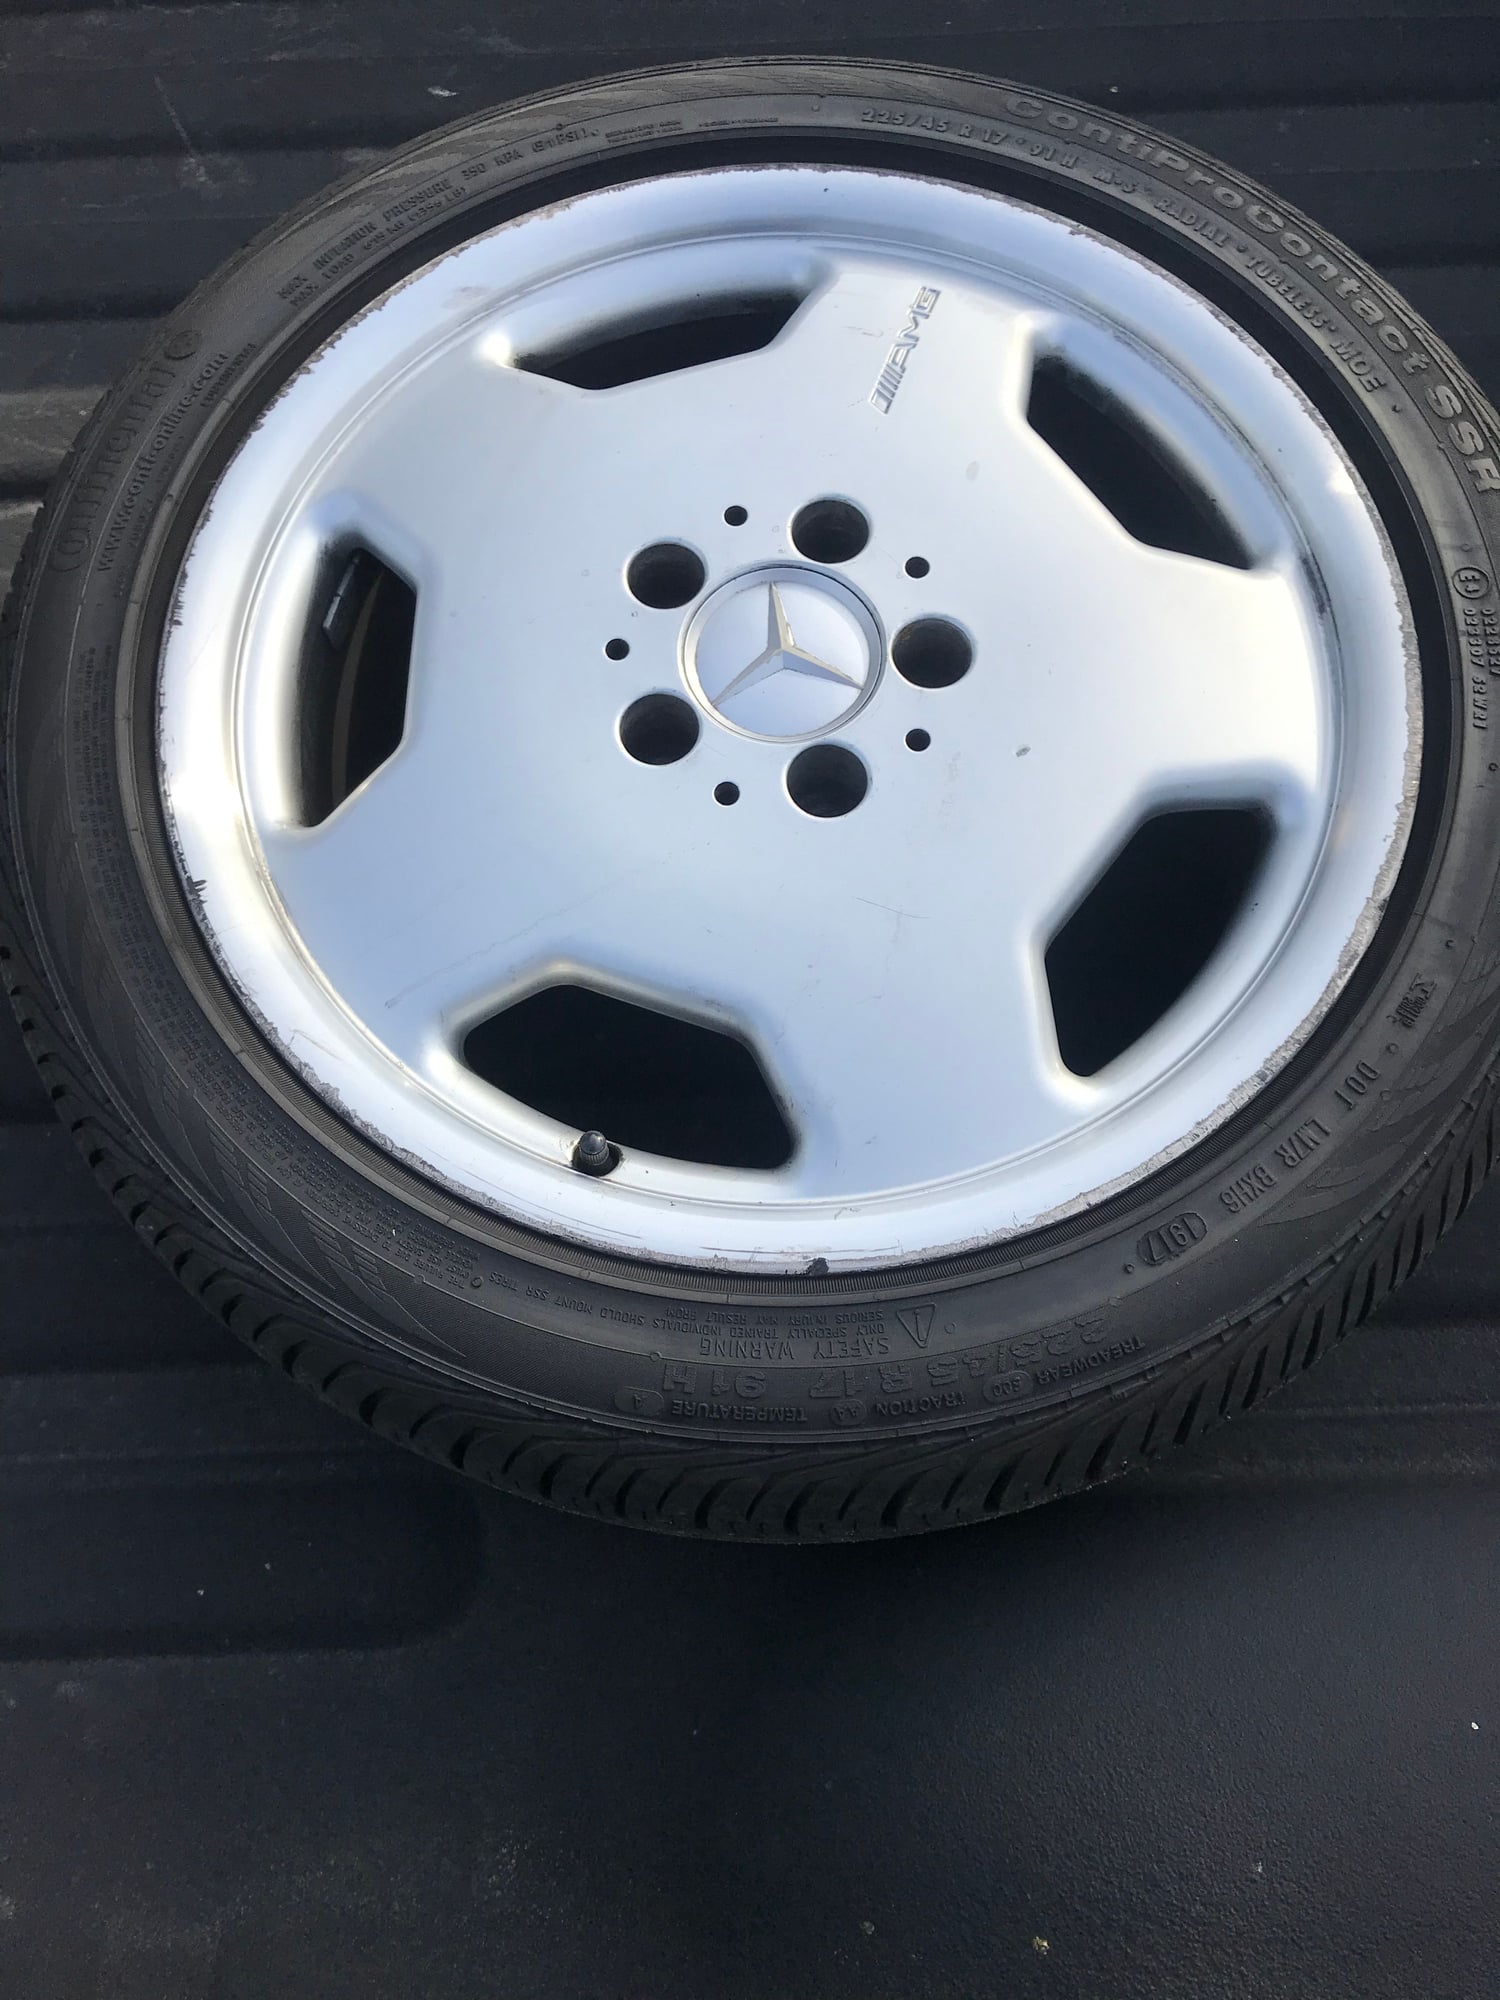 Wheels and Tires/Axles - 17" AMG Monoblocks - Used - Rancho Cucamonga, CA 91737, United States